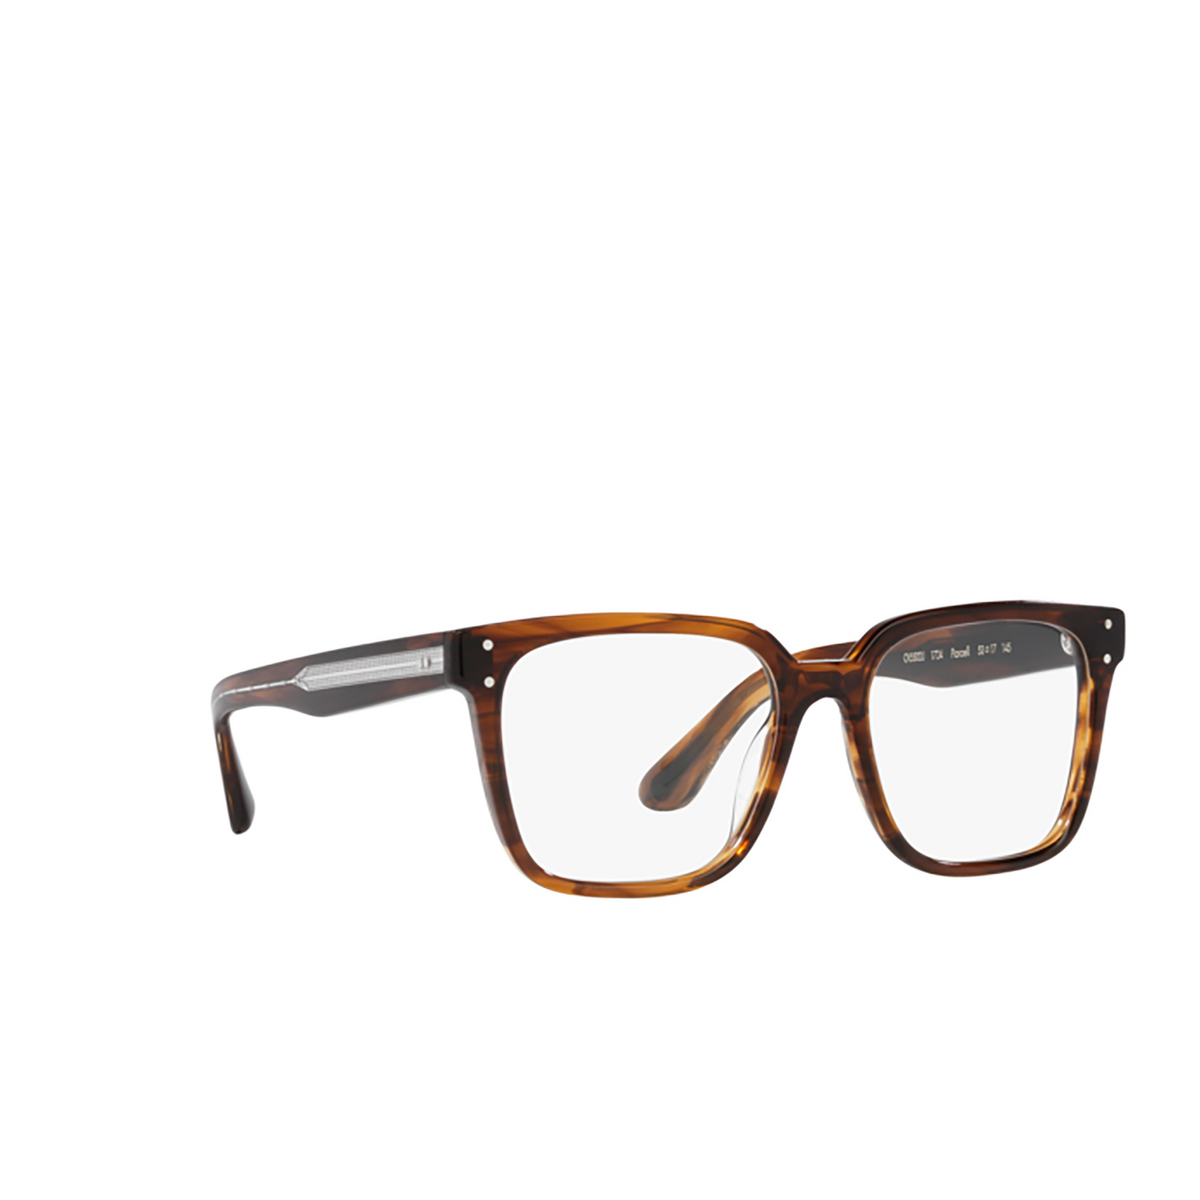 Oliver Peoples PARCELL Eyeglasses 1724 Tuscany Tortoise - 2/4